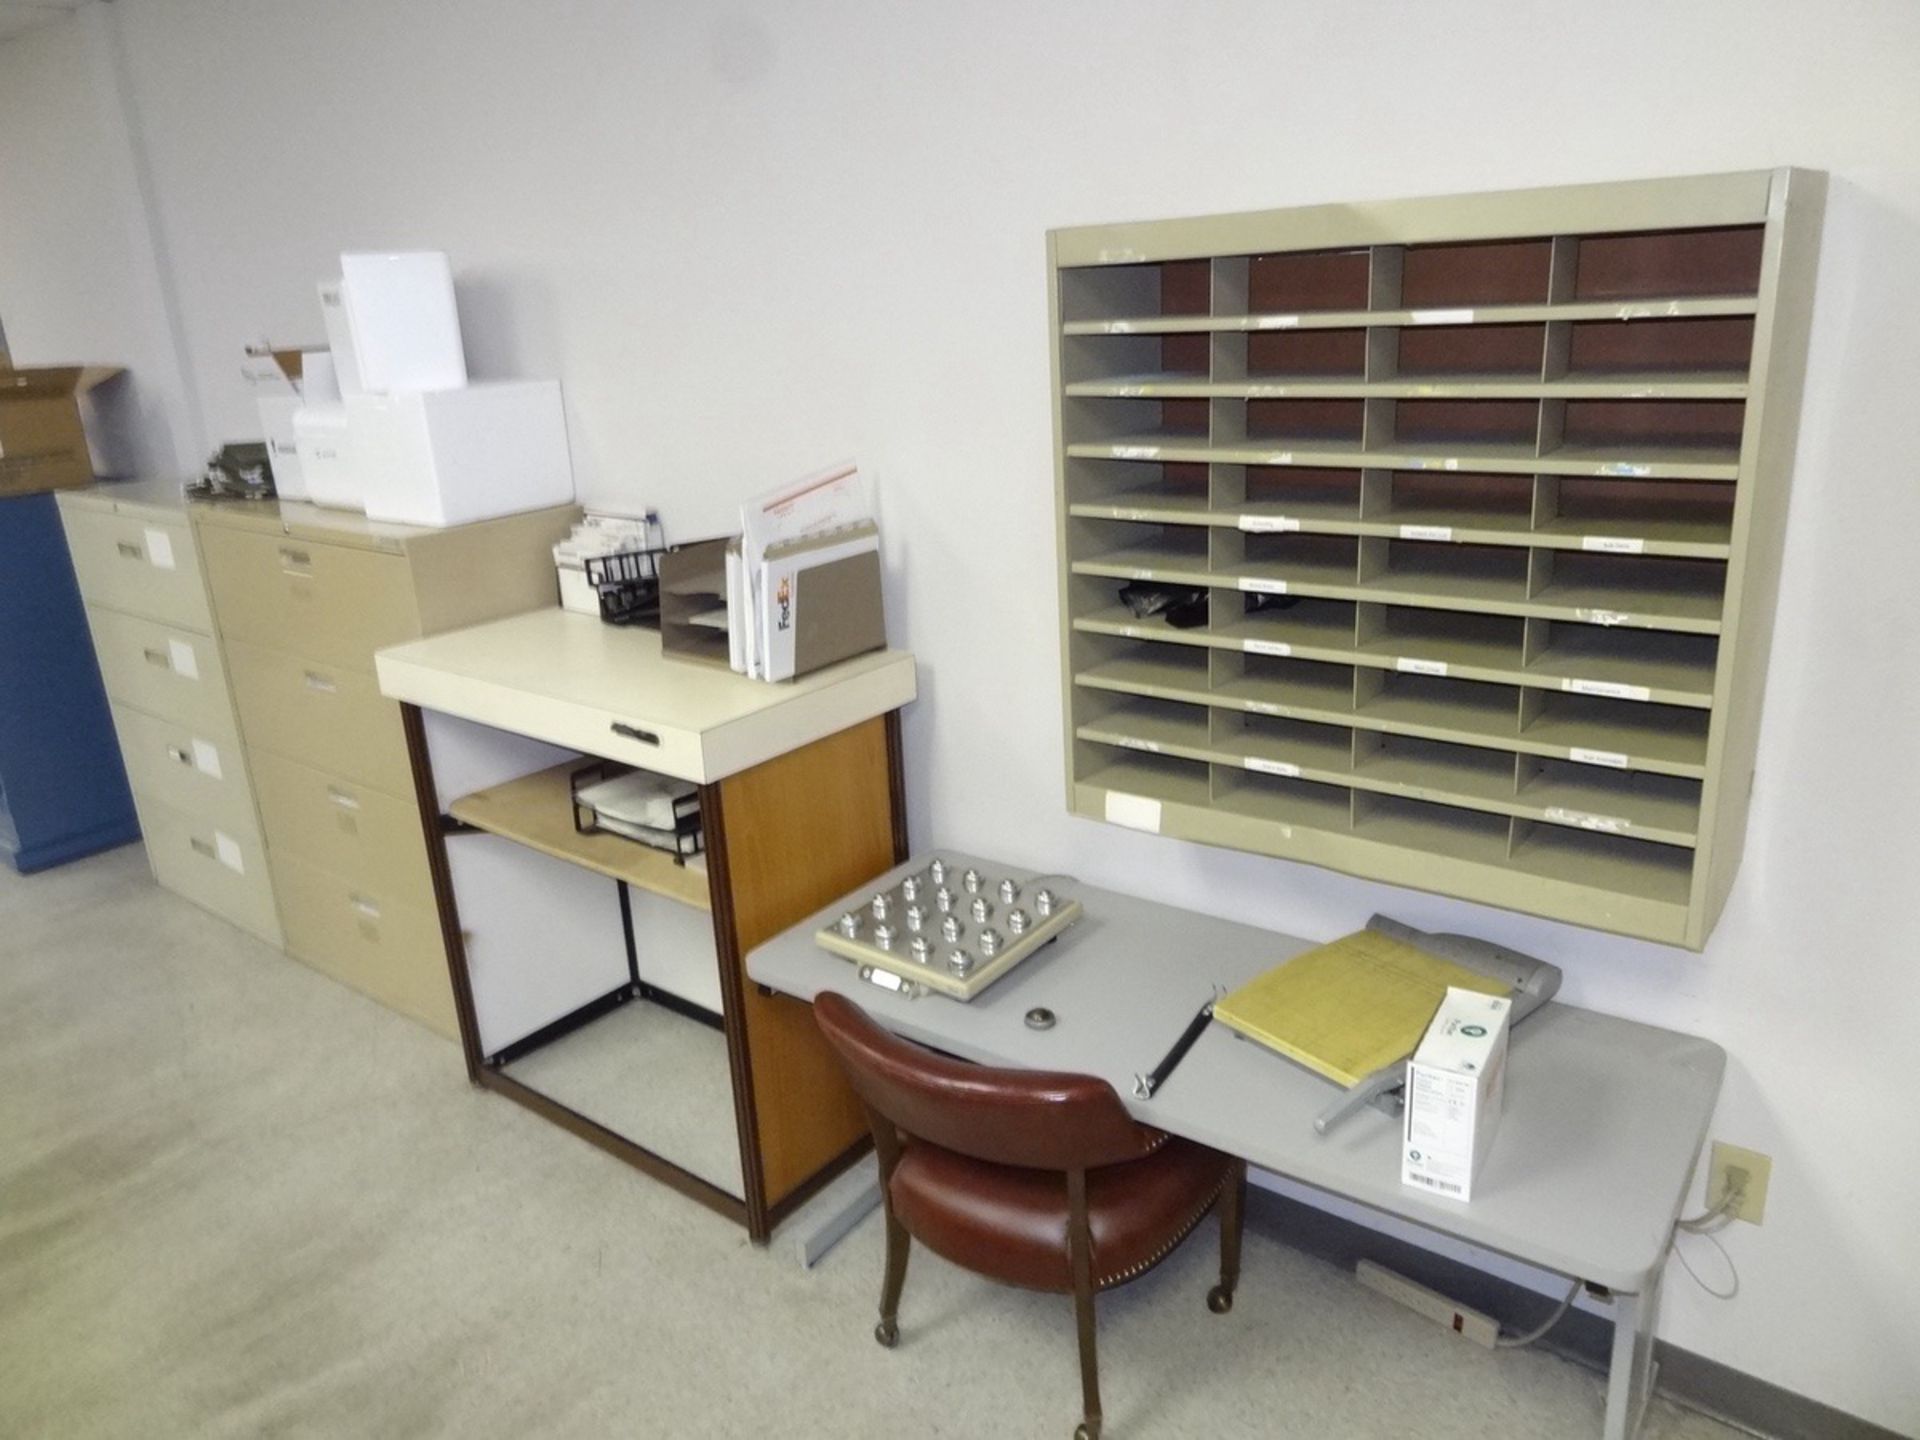 Cubical Room - 2 Desks And (2) 4 Drawer Lateral File Cabinets | Rig Fee: See Full Desc